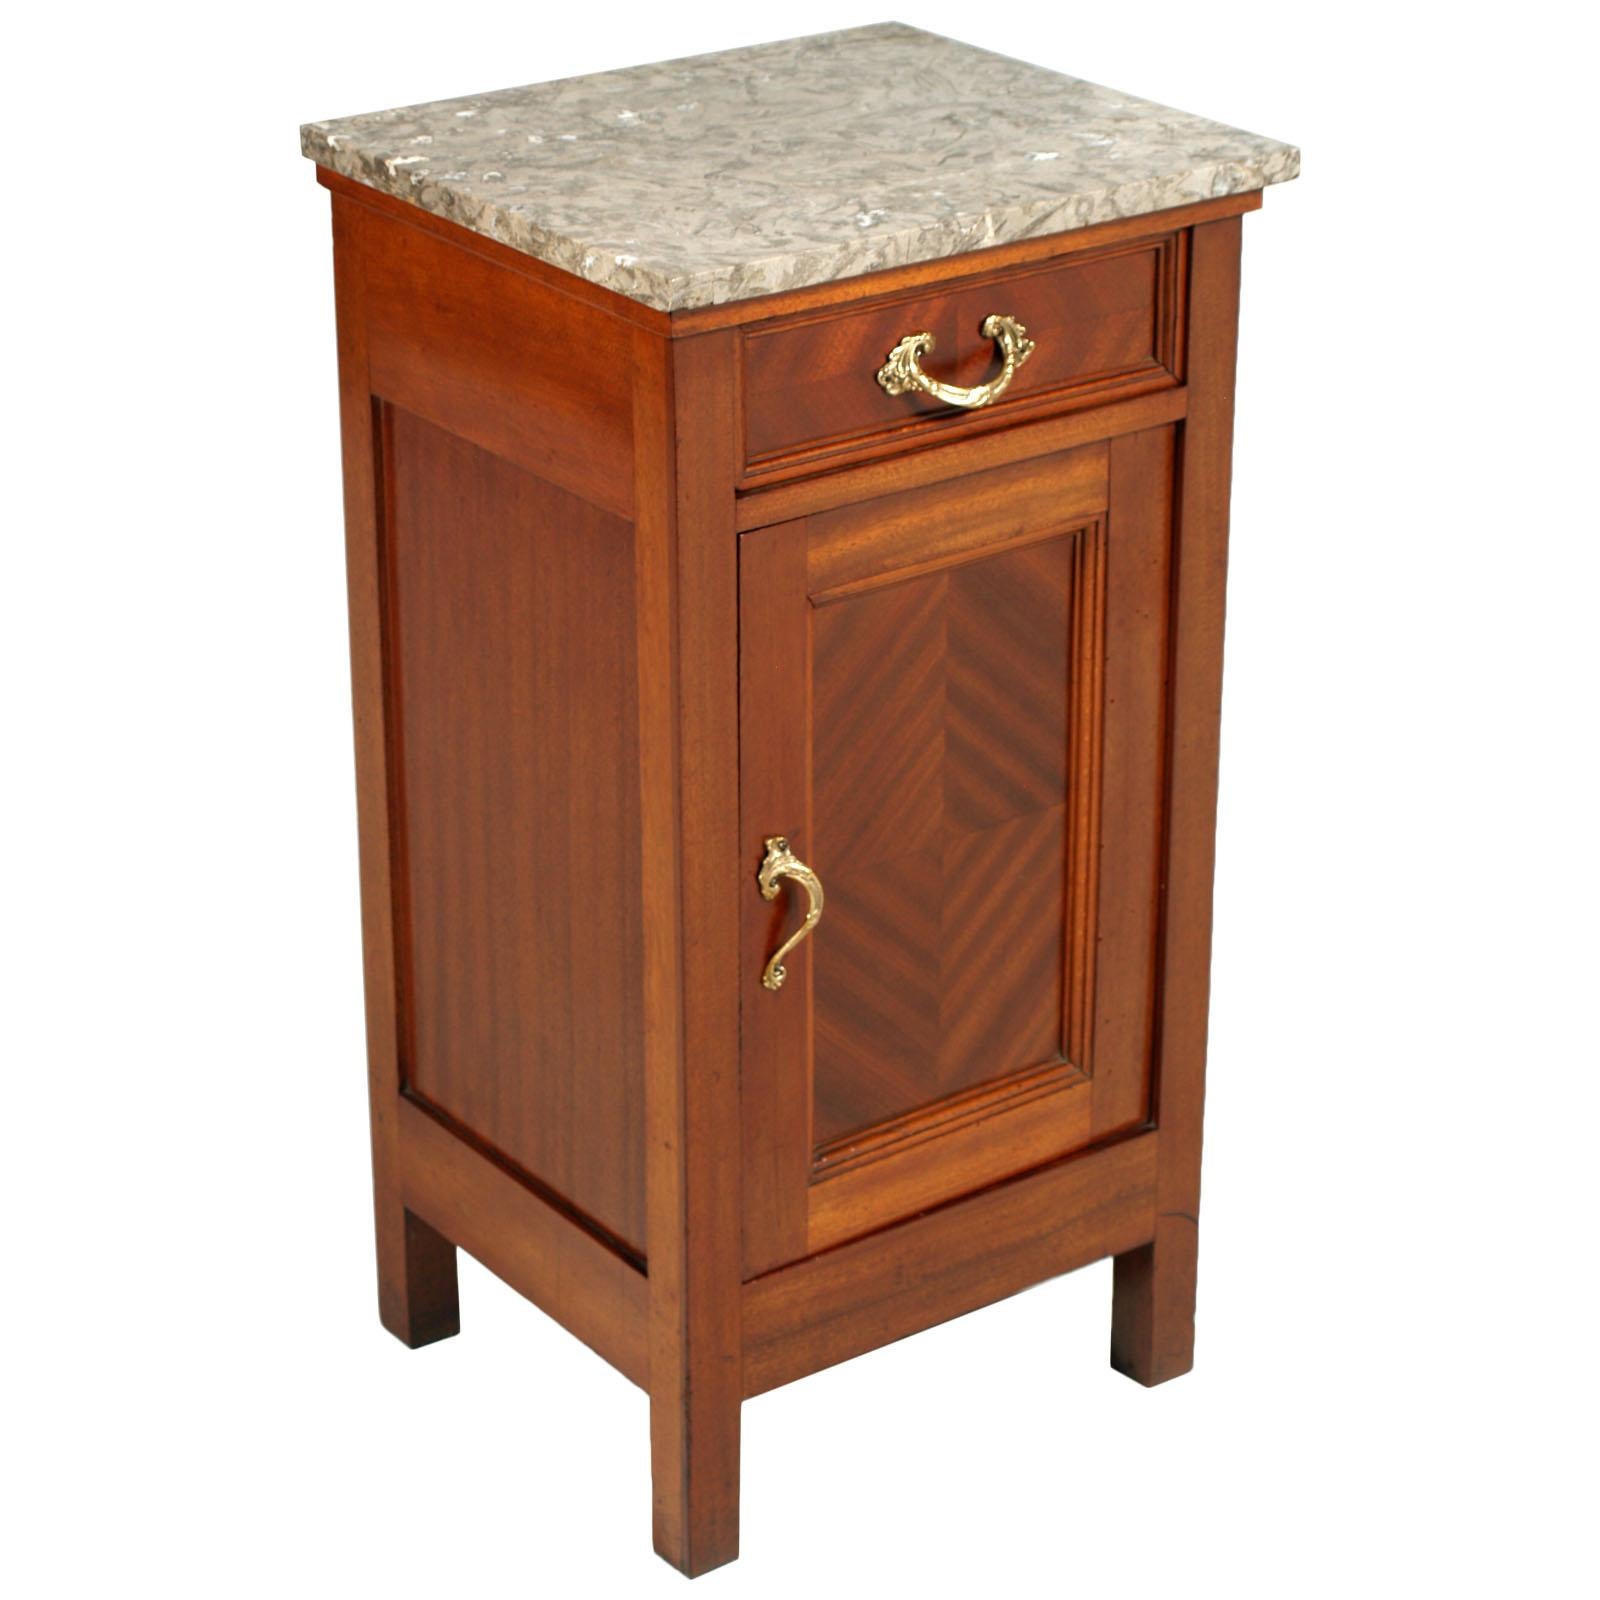 Italy 1910s Art Nouveau Nightstand in Mahogany, Marble Top Restored Wax Polished 3